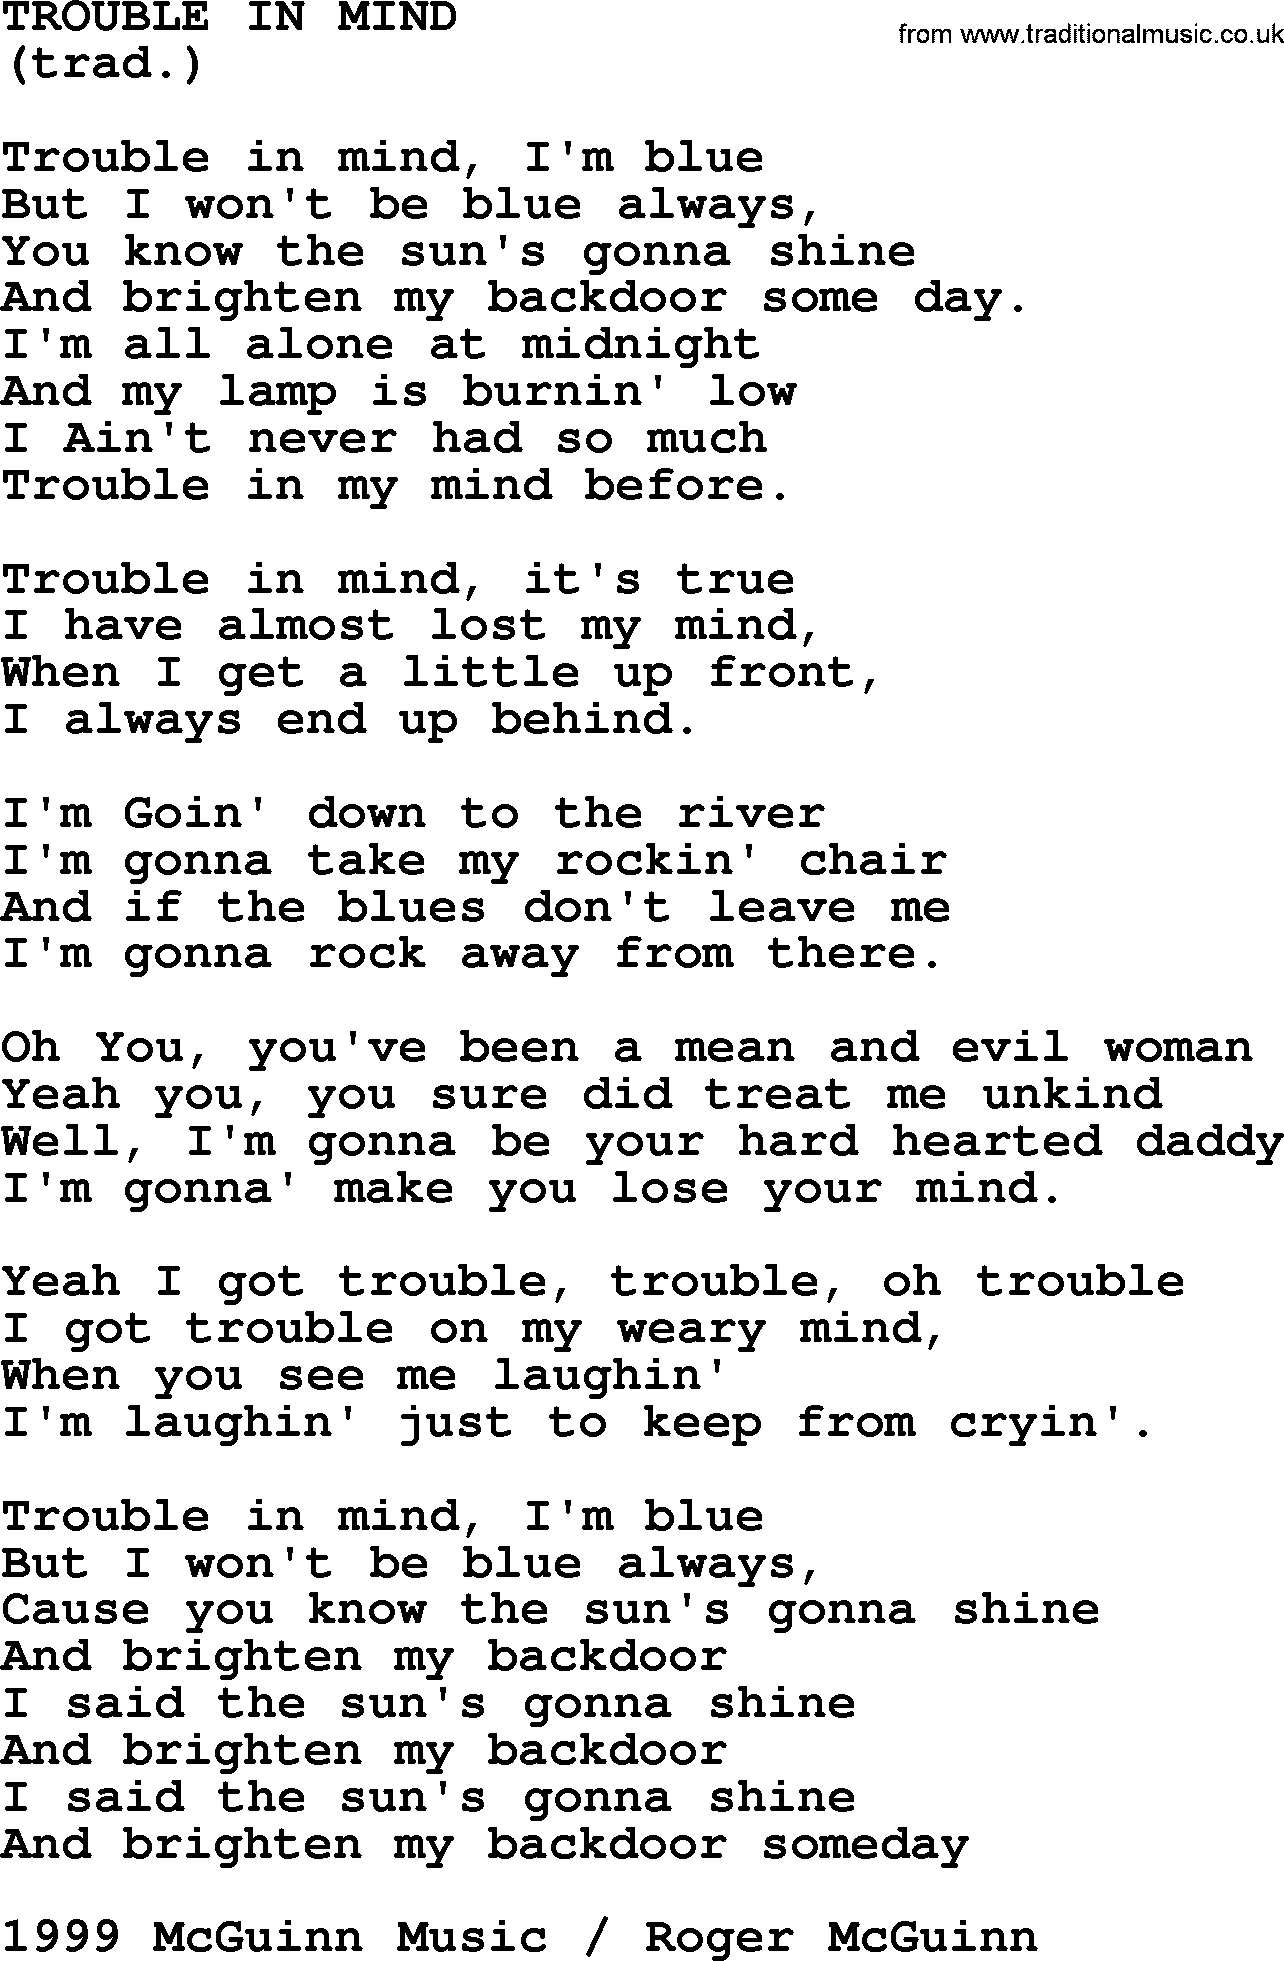 The Byrds song Trouble In Mind, lyrics